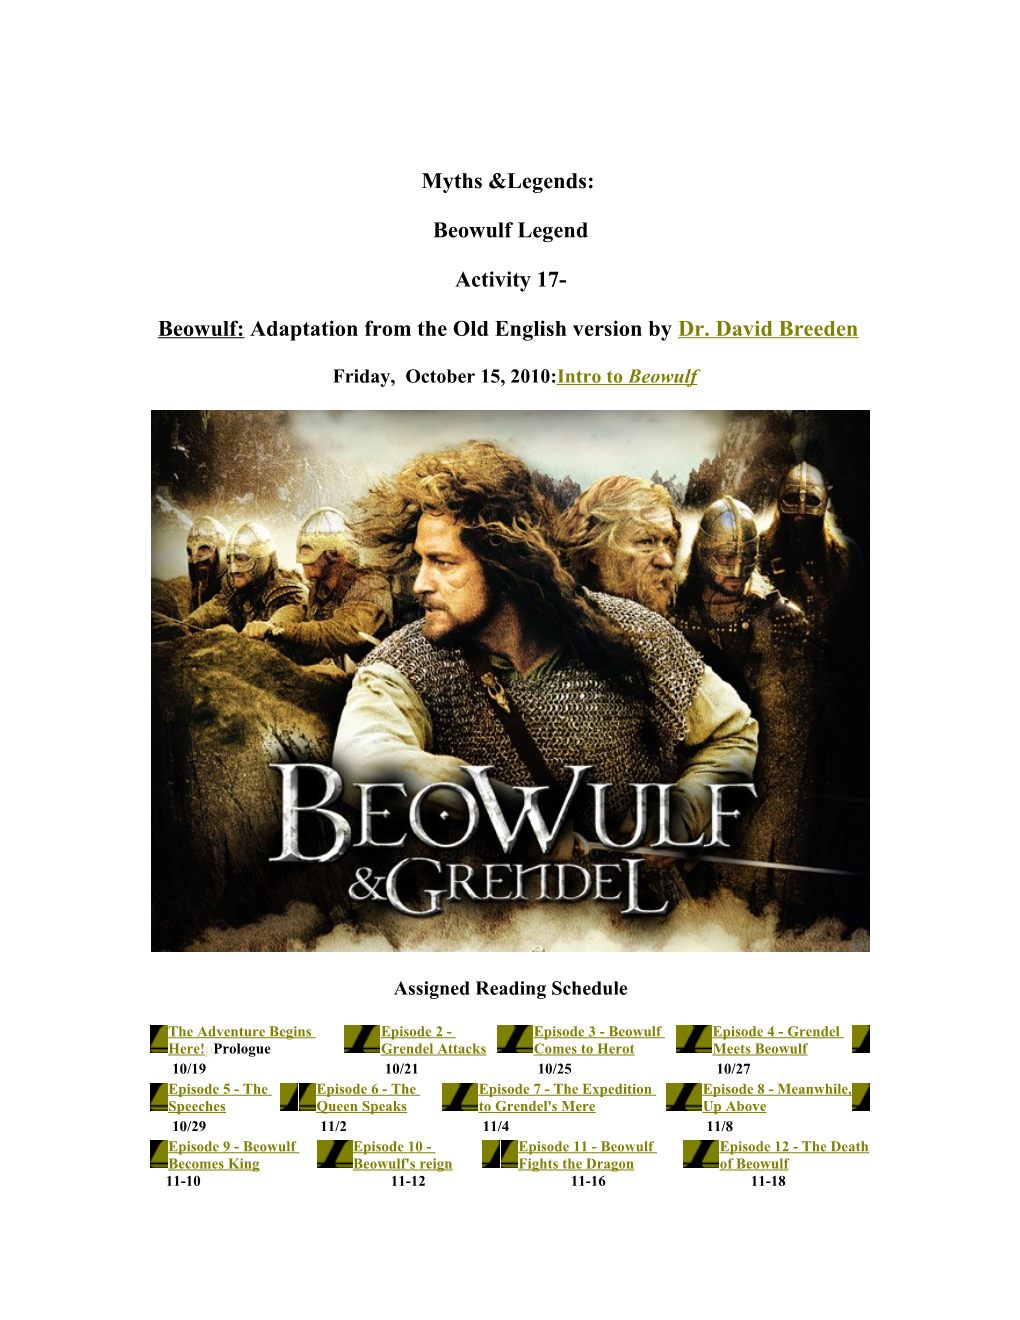 Beowulf: Adaptation from the Old English Version by Dr